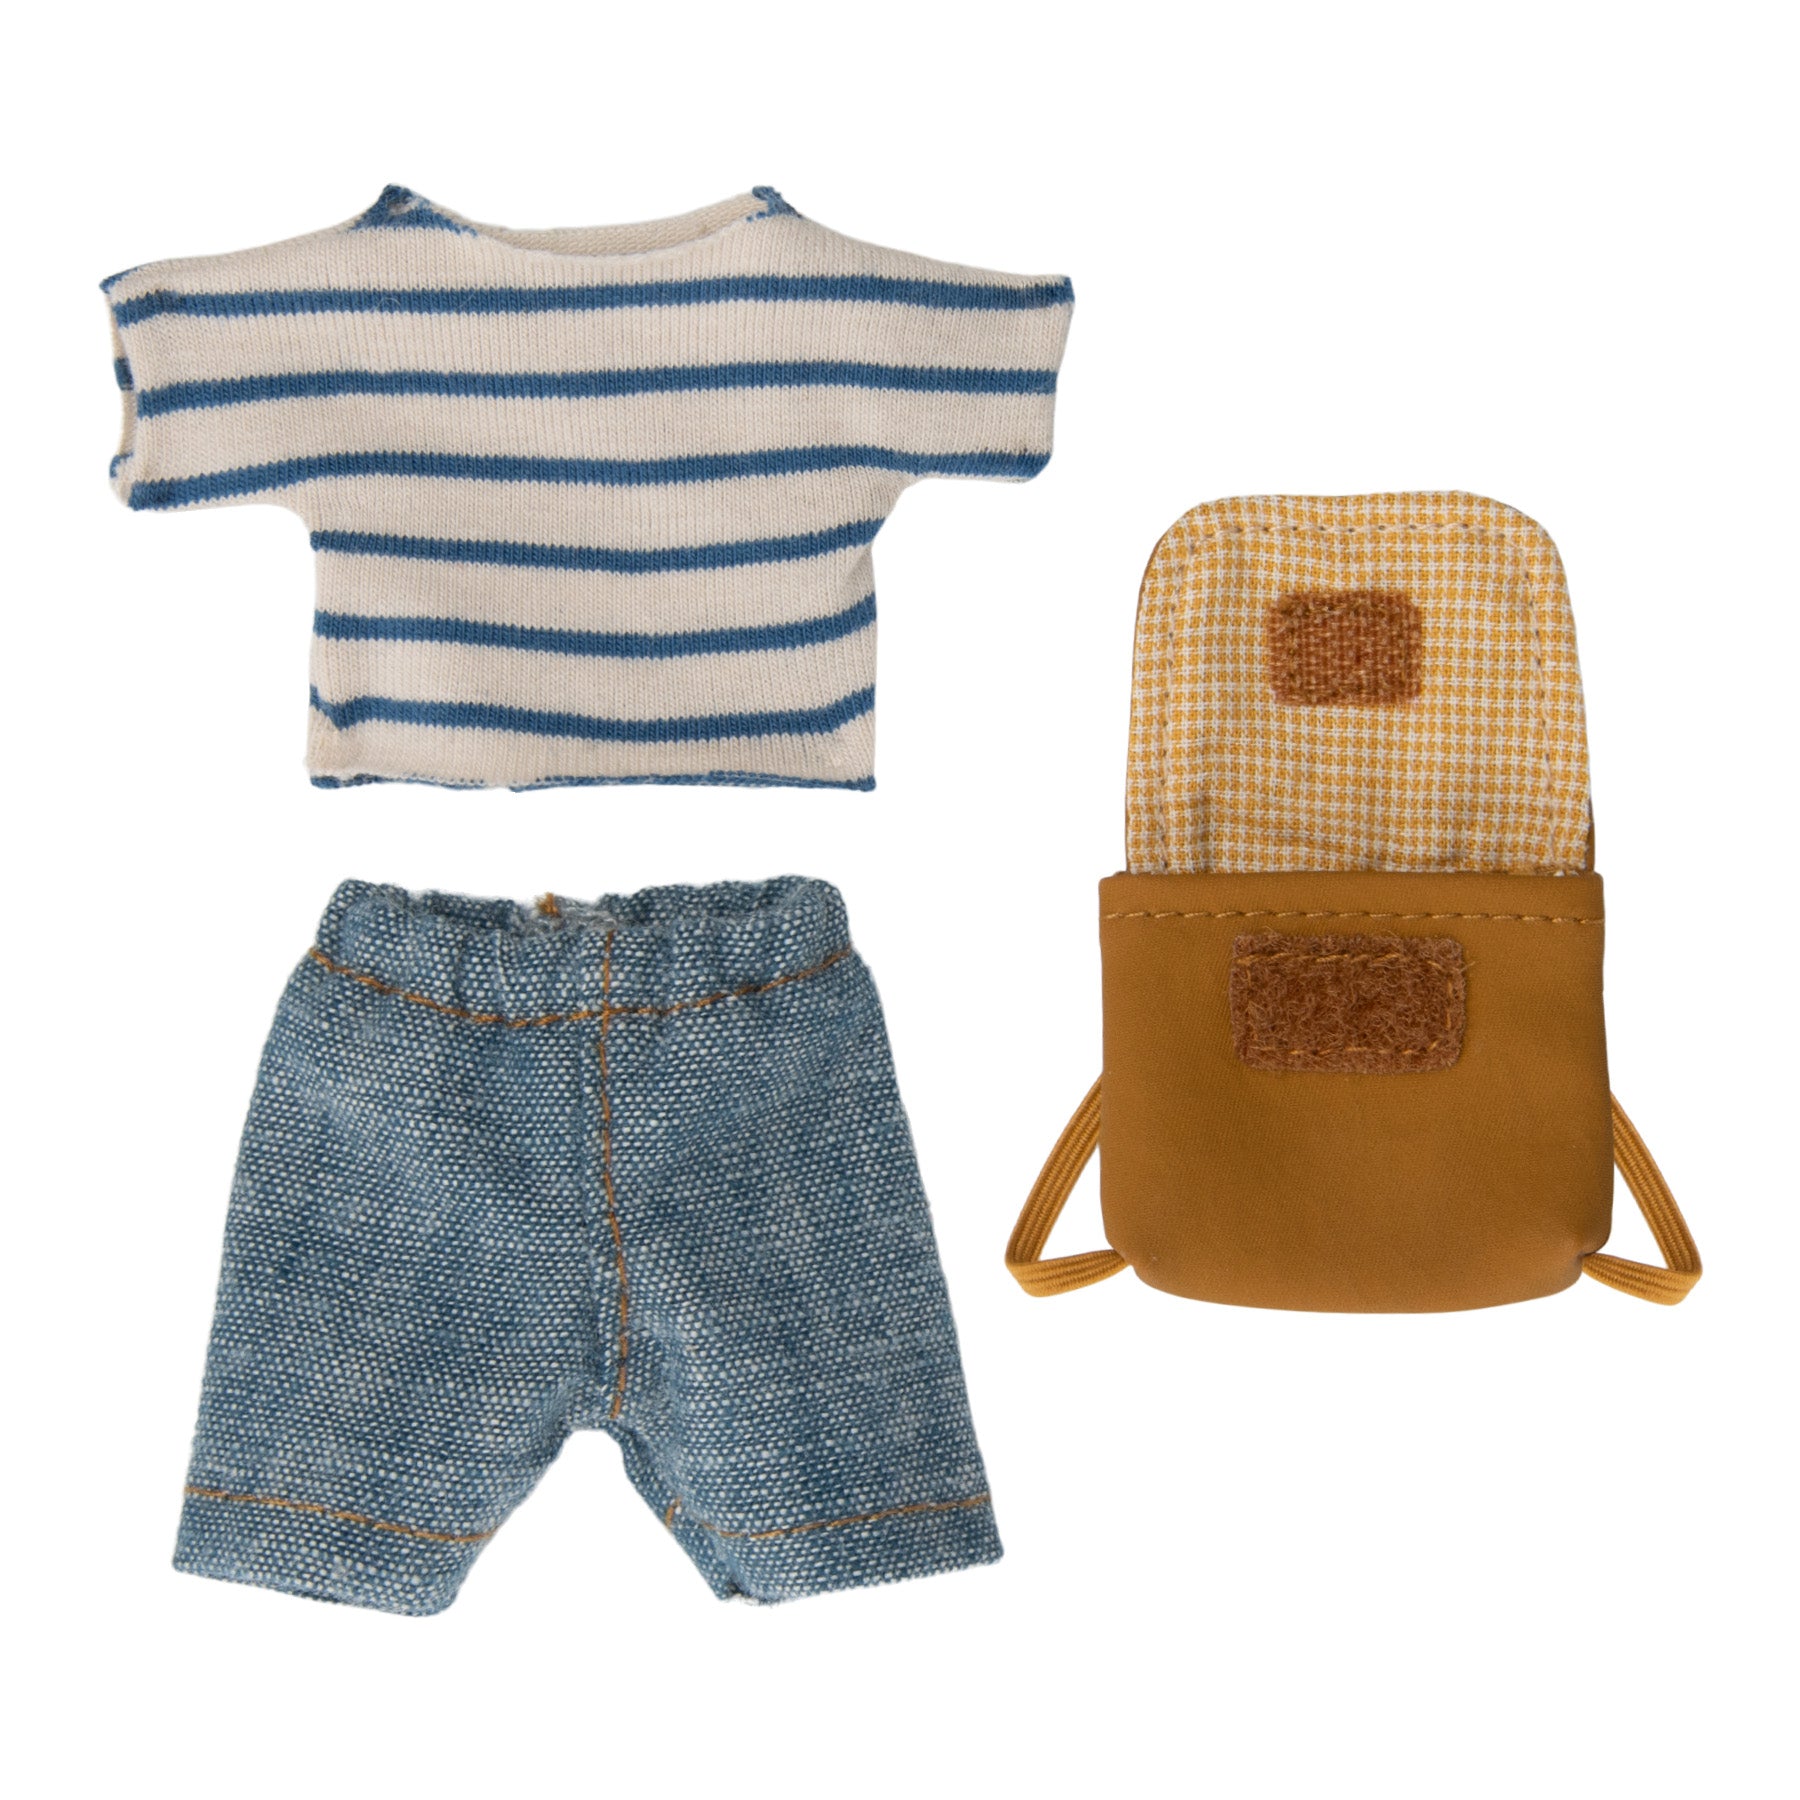 maileg mouse clothes - blue and white stripe t-shirt, blue denim shorts and a brown rucksack suitable for big brother mice